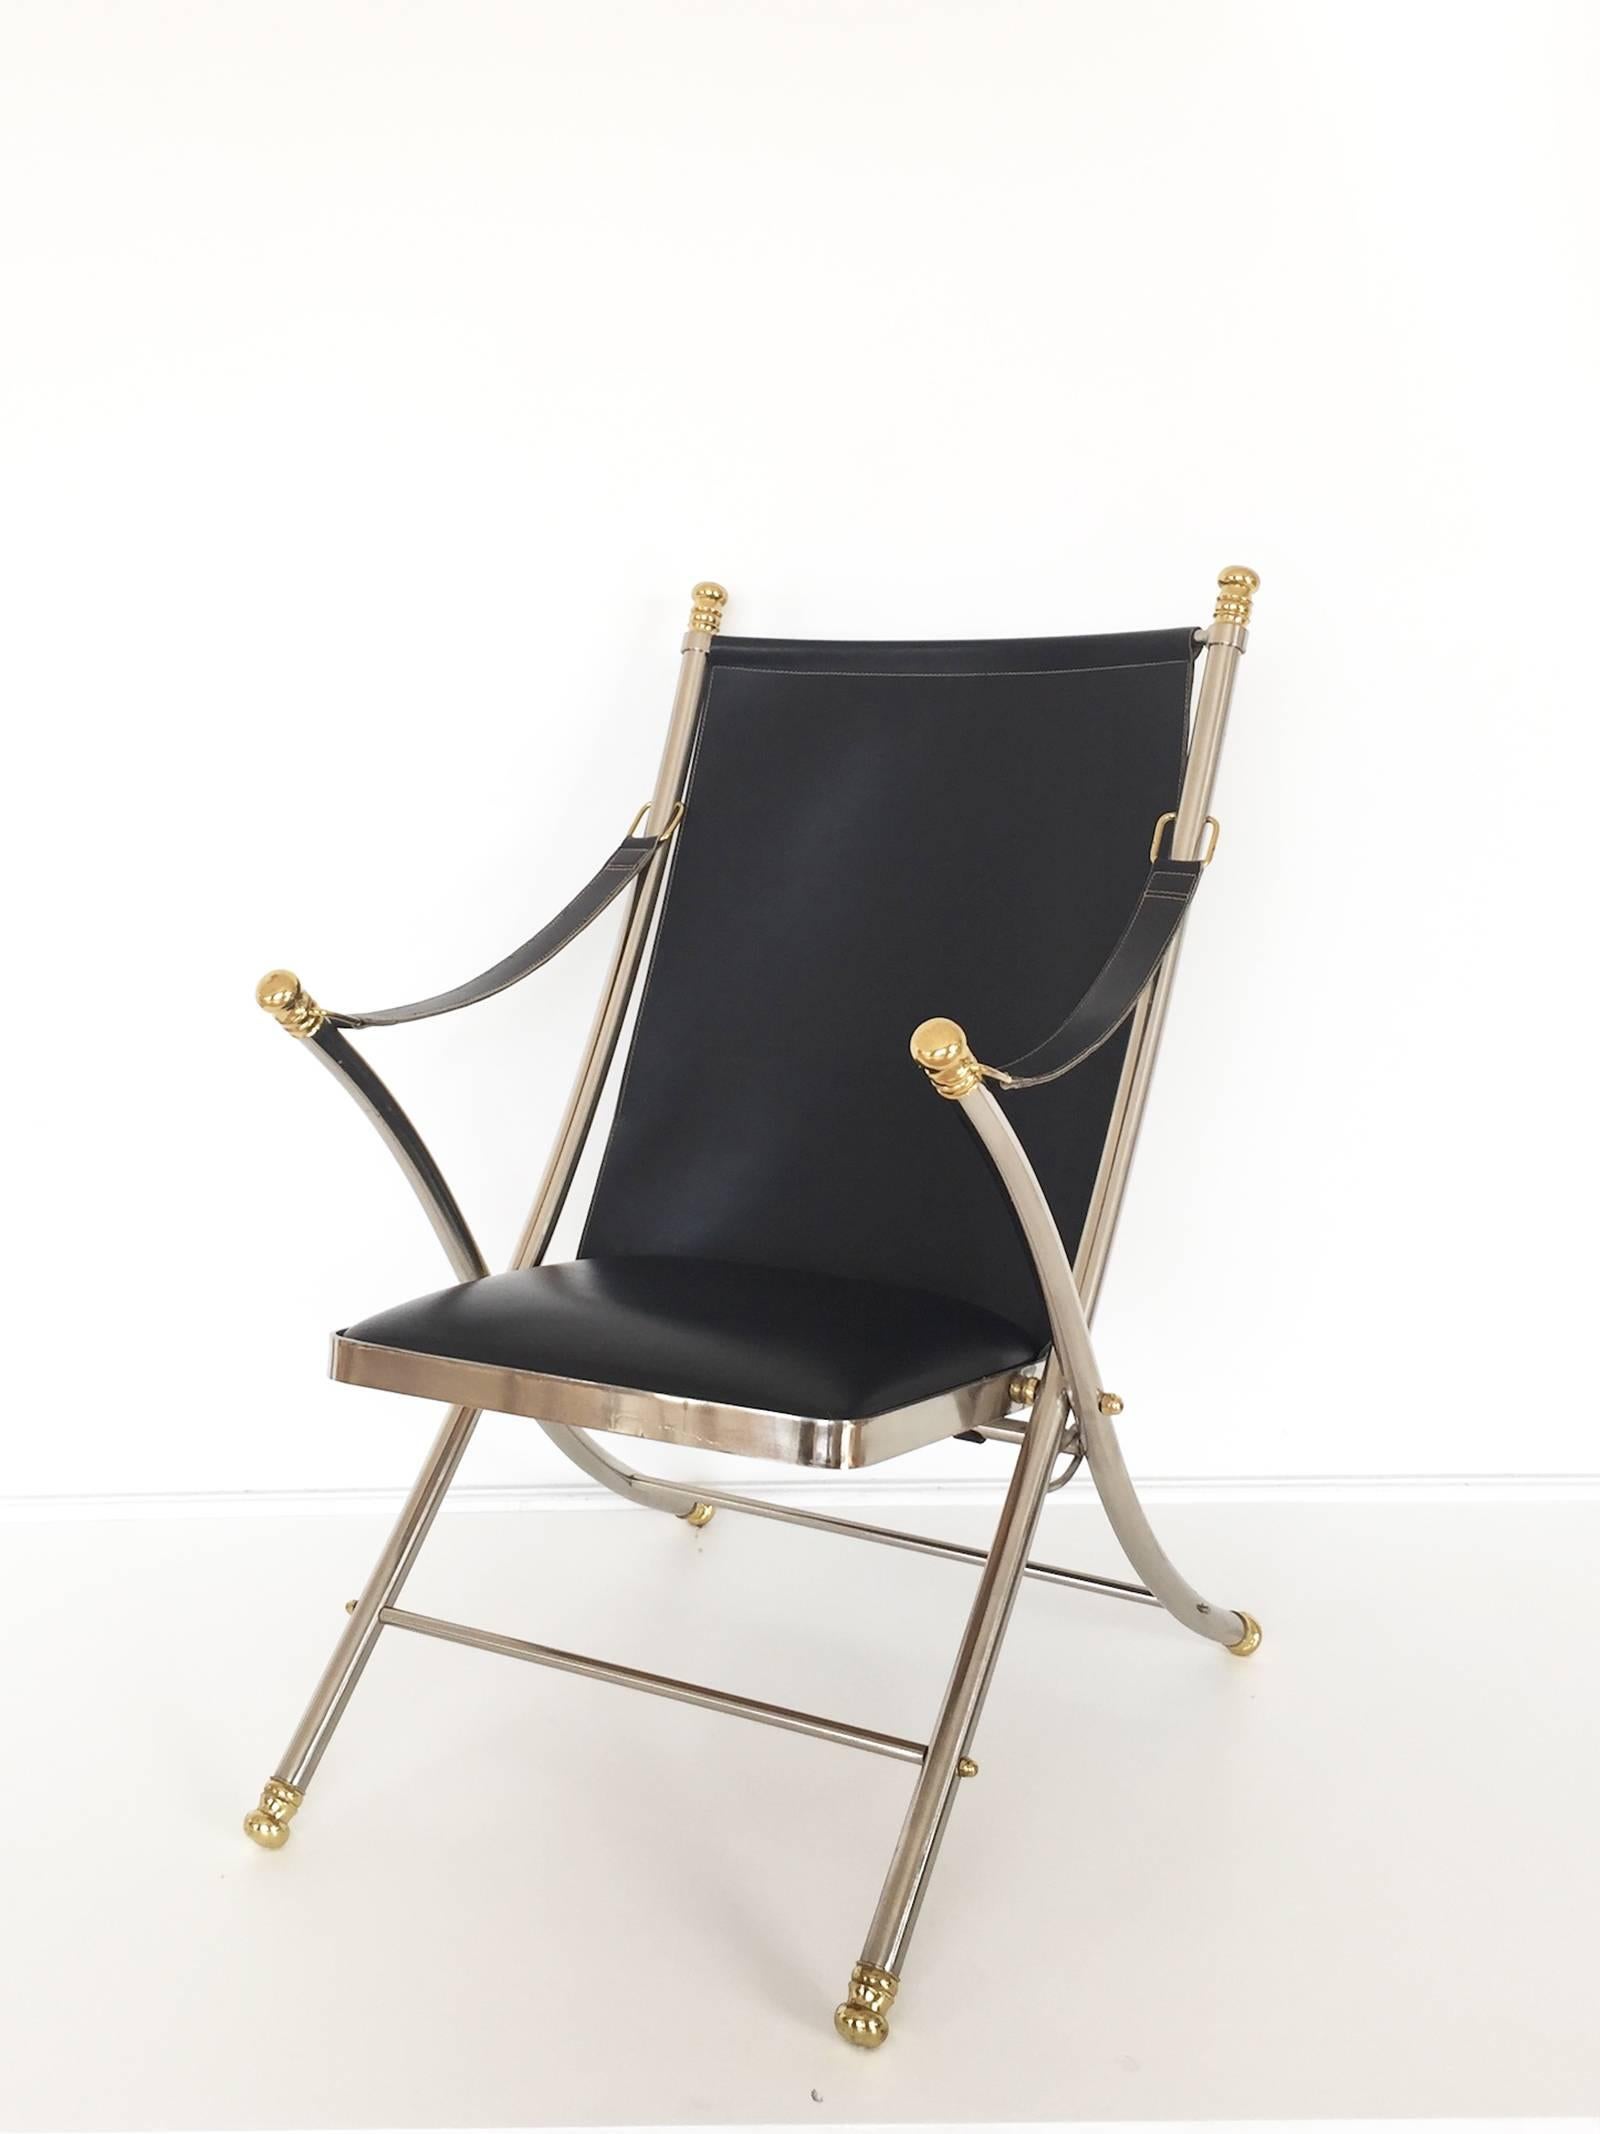 Italian Folding Steel and Brass Campaign Chair by Maison Jansen, Italy, 1970s